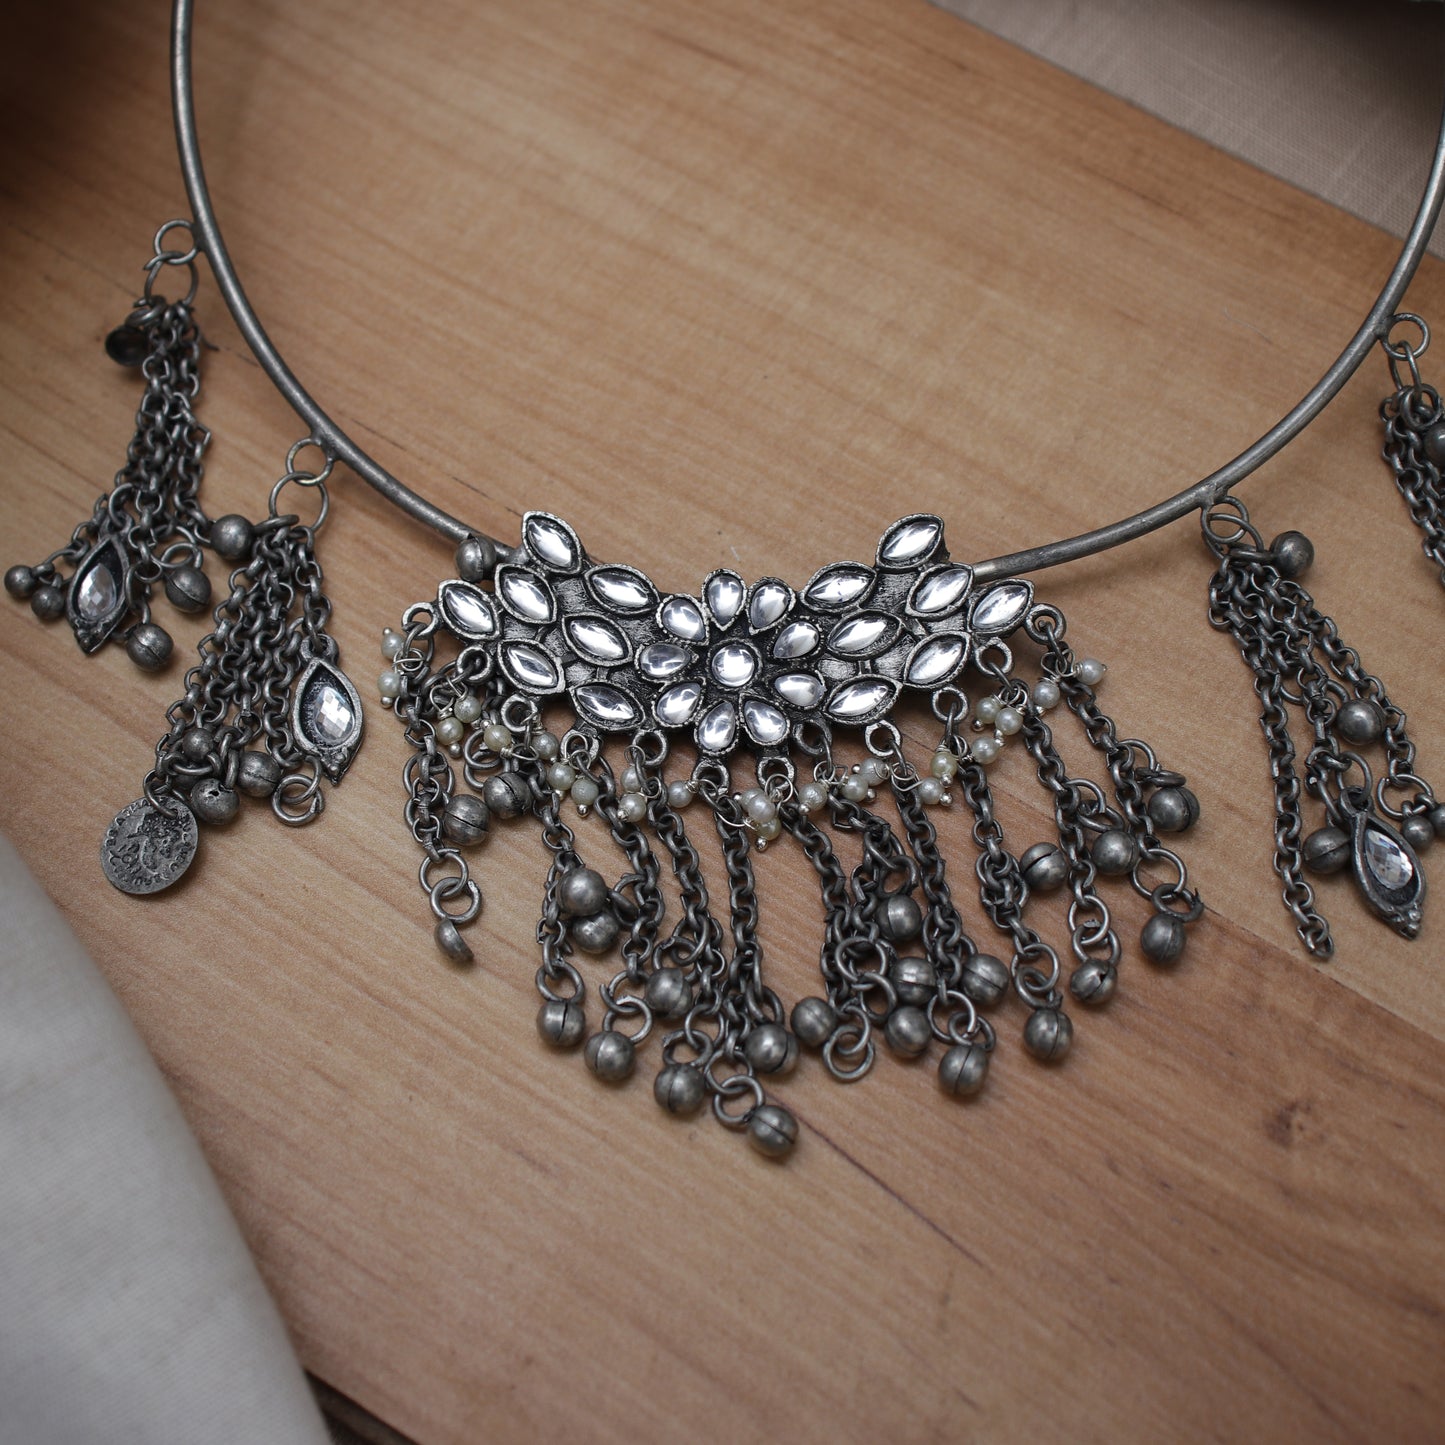 The Magical Drool Downs Hasli Necklace Set